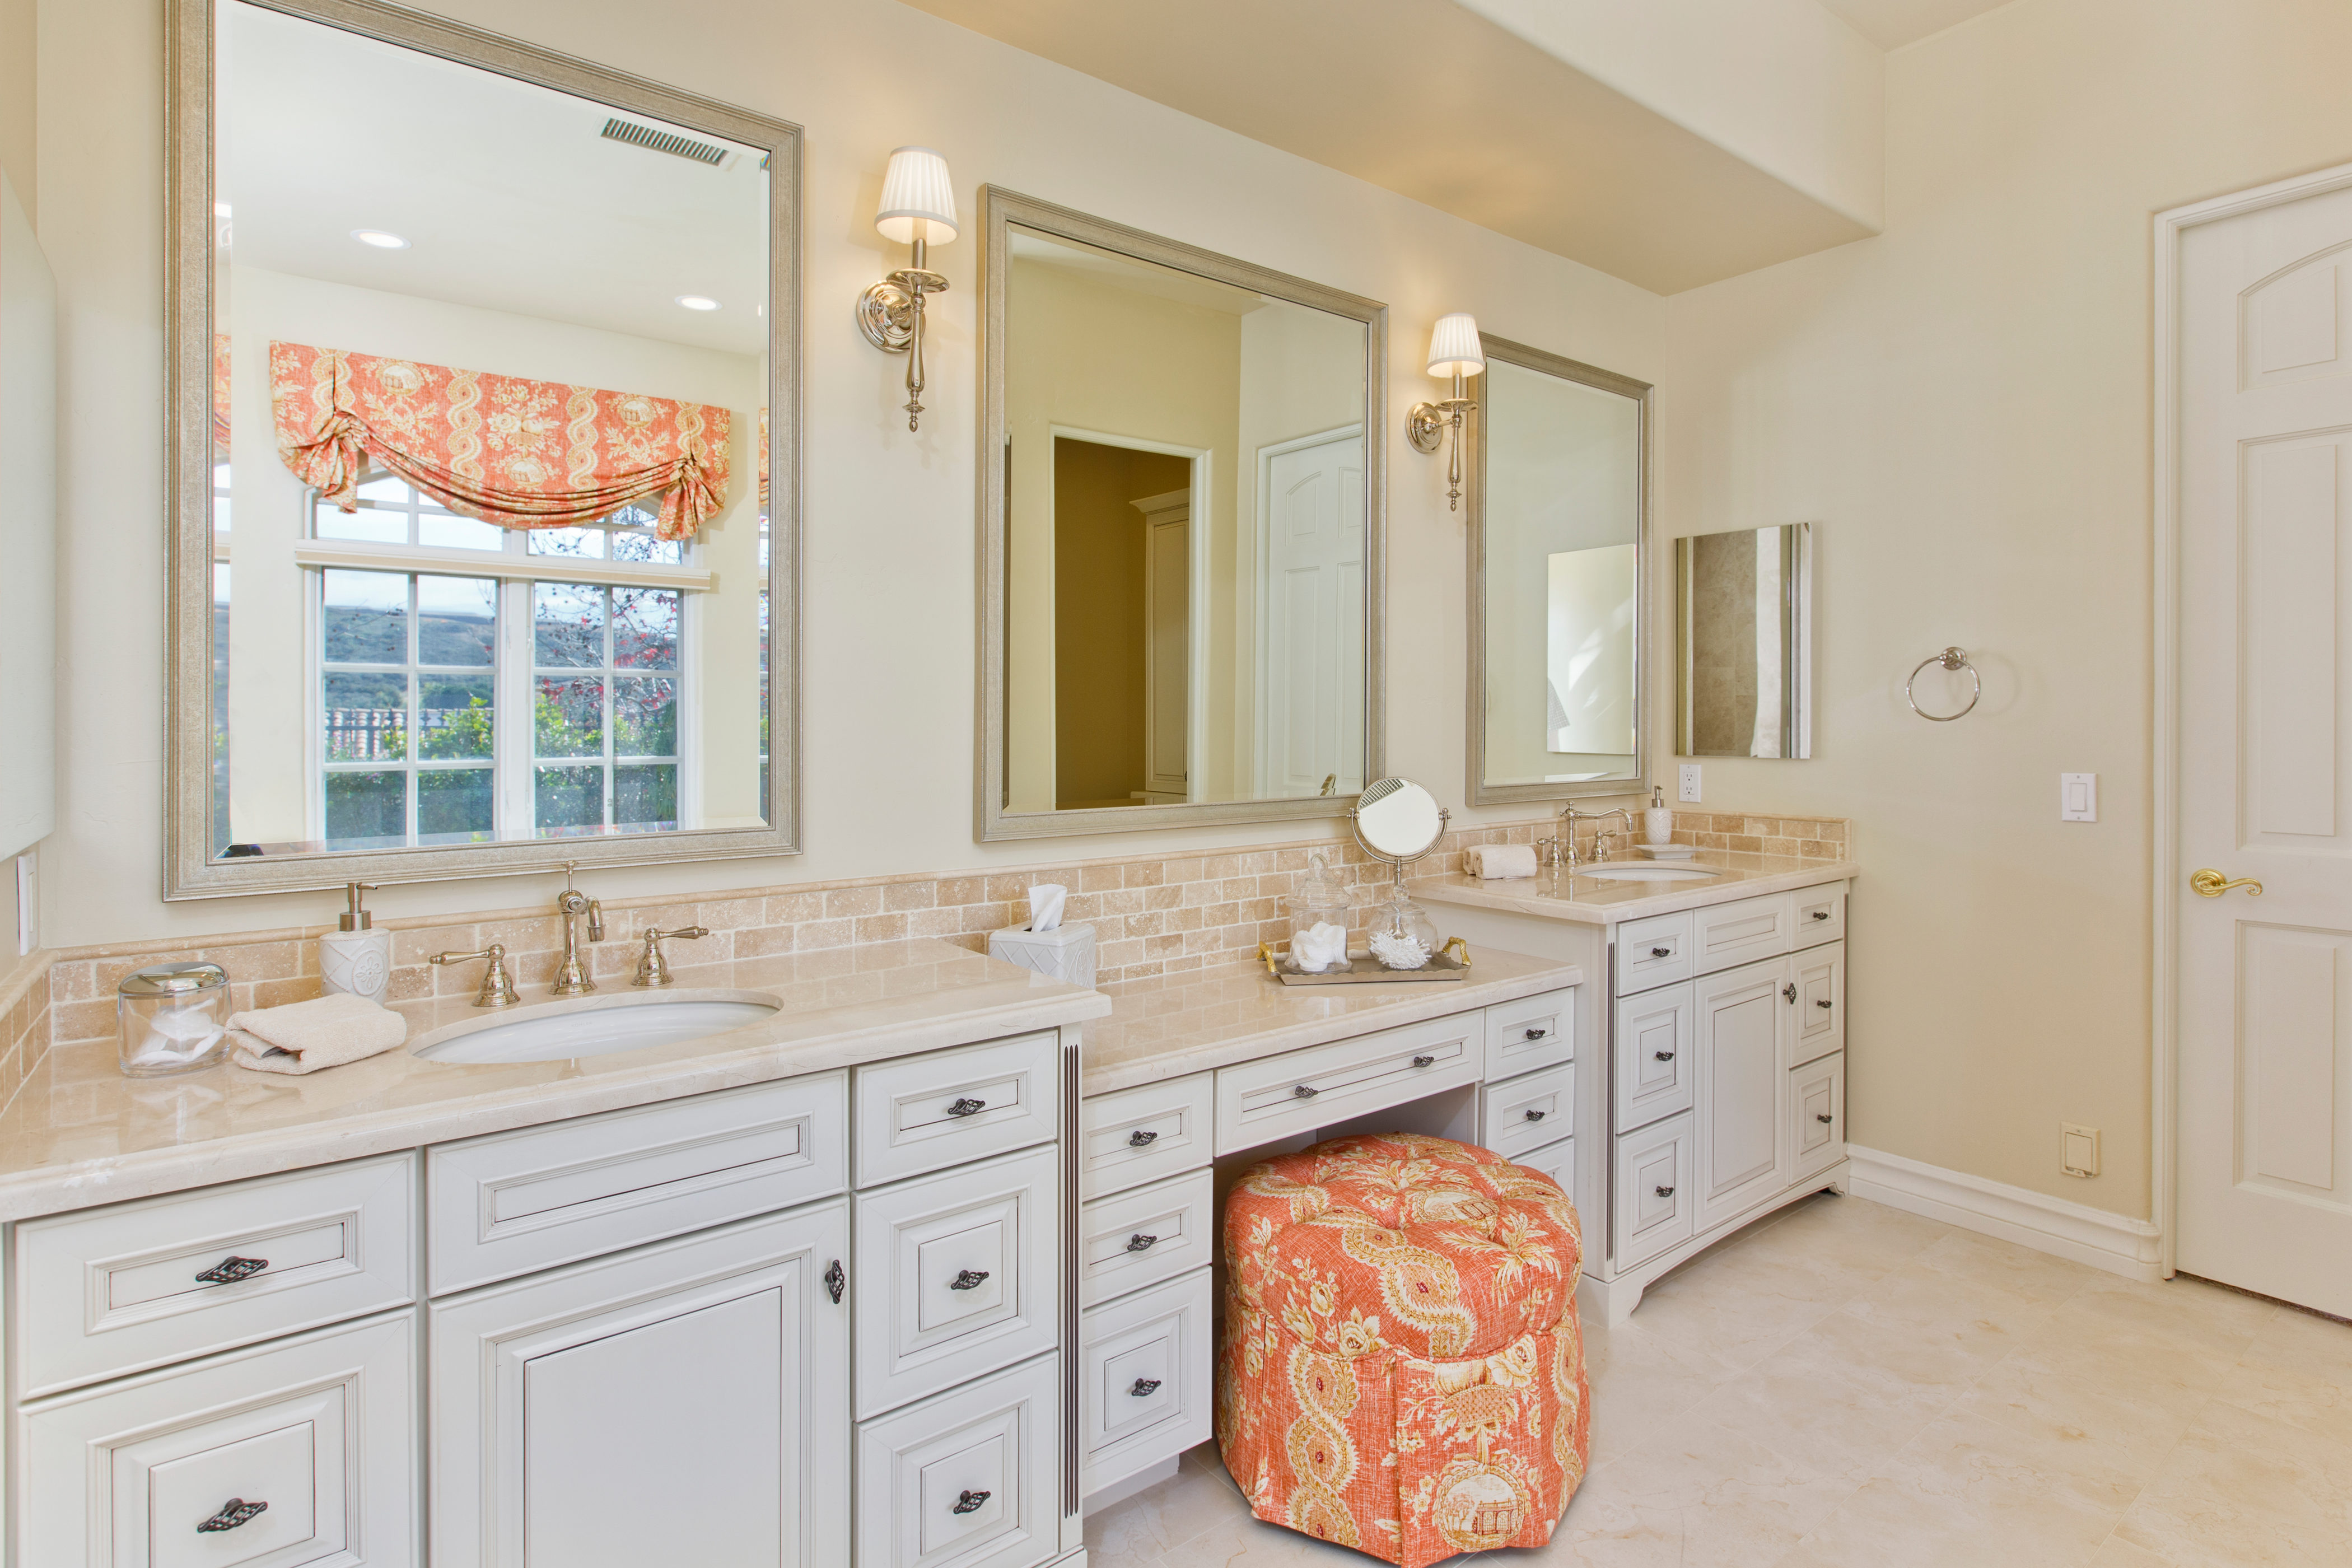 1970’s master bathroom now has a Touch of Luxury